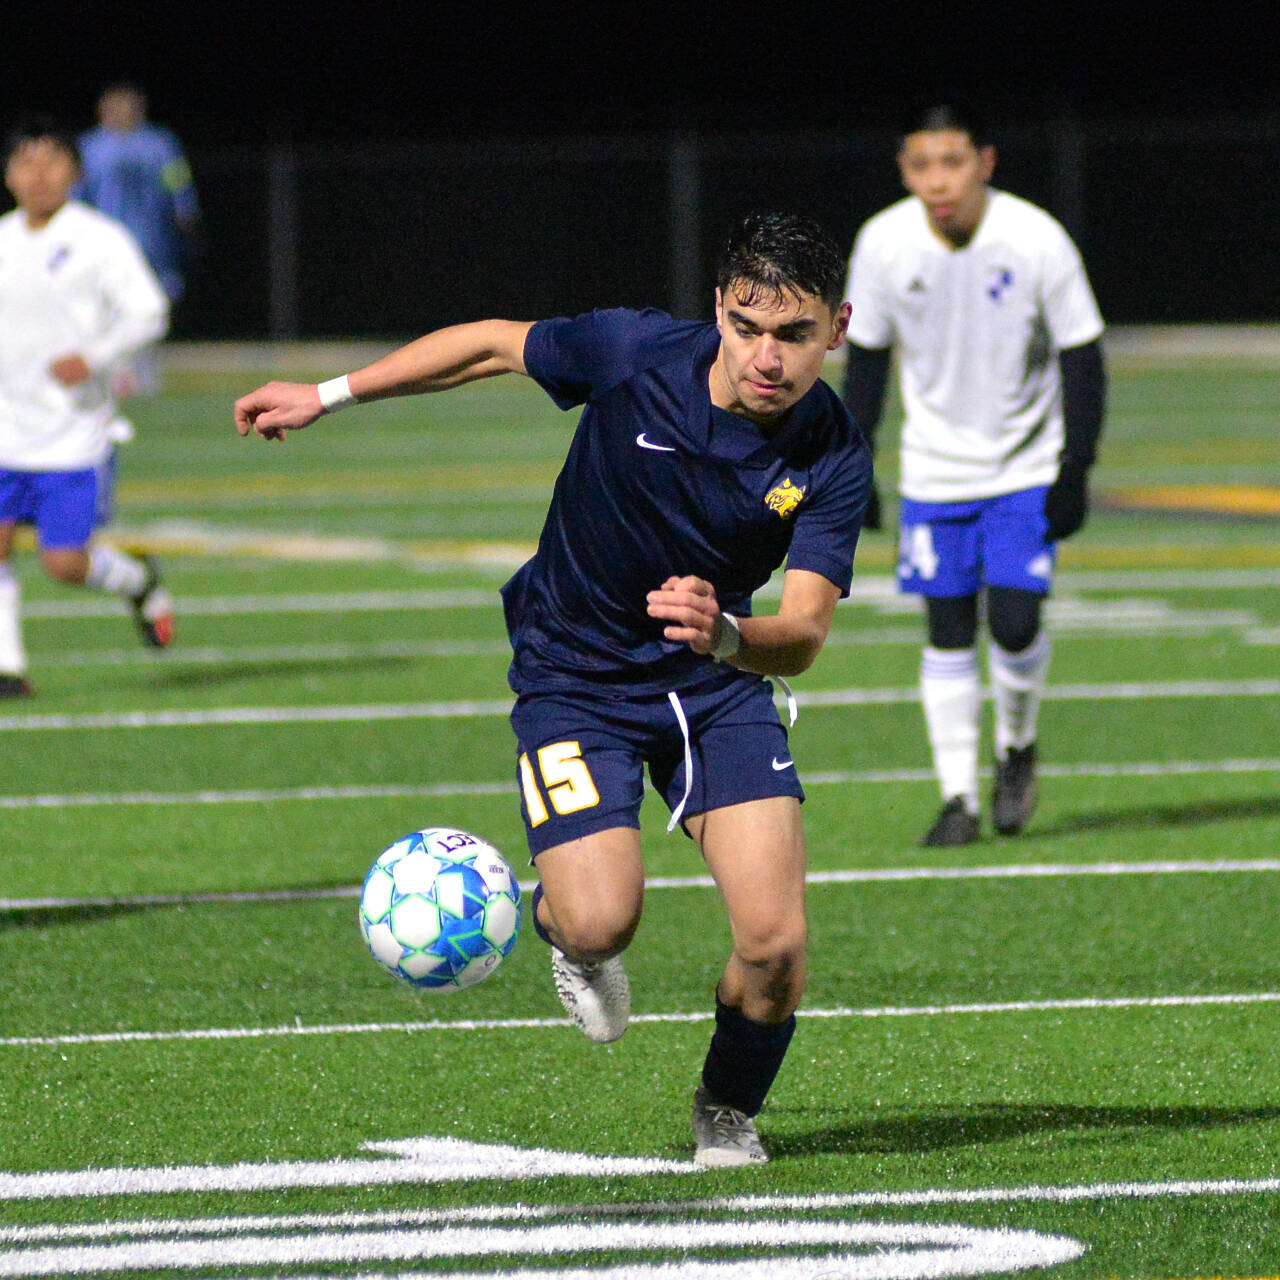 RYAN SPARKS | THE DAILY WORLD Aberdeen forward Carlos Mendoza pushes the ball forward in the second half of the Bobcats 3-0 win over Elma on Monday in Aberdeen.